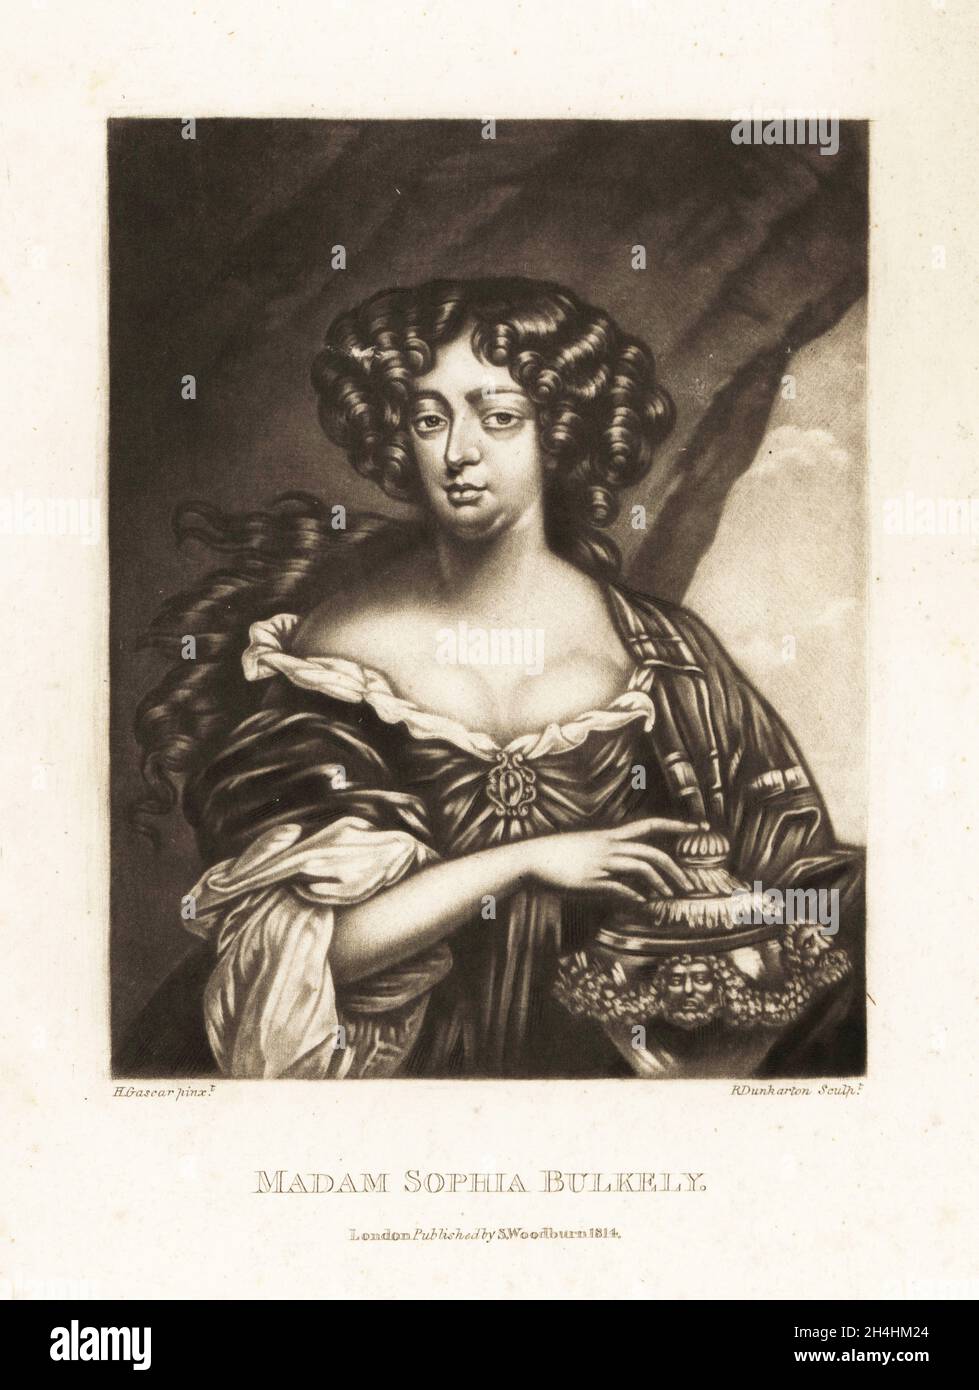 Sophia Bulkely (nee Stuart), c.1660-1718, Scottish Jacobite courtier. Wife of Henry Bulkeley, lady of the bedchamber to queen Mary of Modena. Madam Sophia Bulkely. Mezzotint engraving by Robert Dunkarton after a portrait by Henry Gascar from Richard Earlom and Charles Turner's Portraits of Characters Illustrious in British History Engraved in Mezzotinto, published by S. Woodburn, London, 1814. Stock Photo